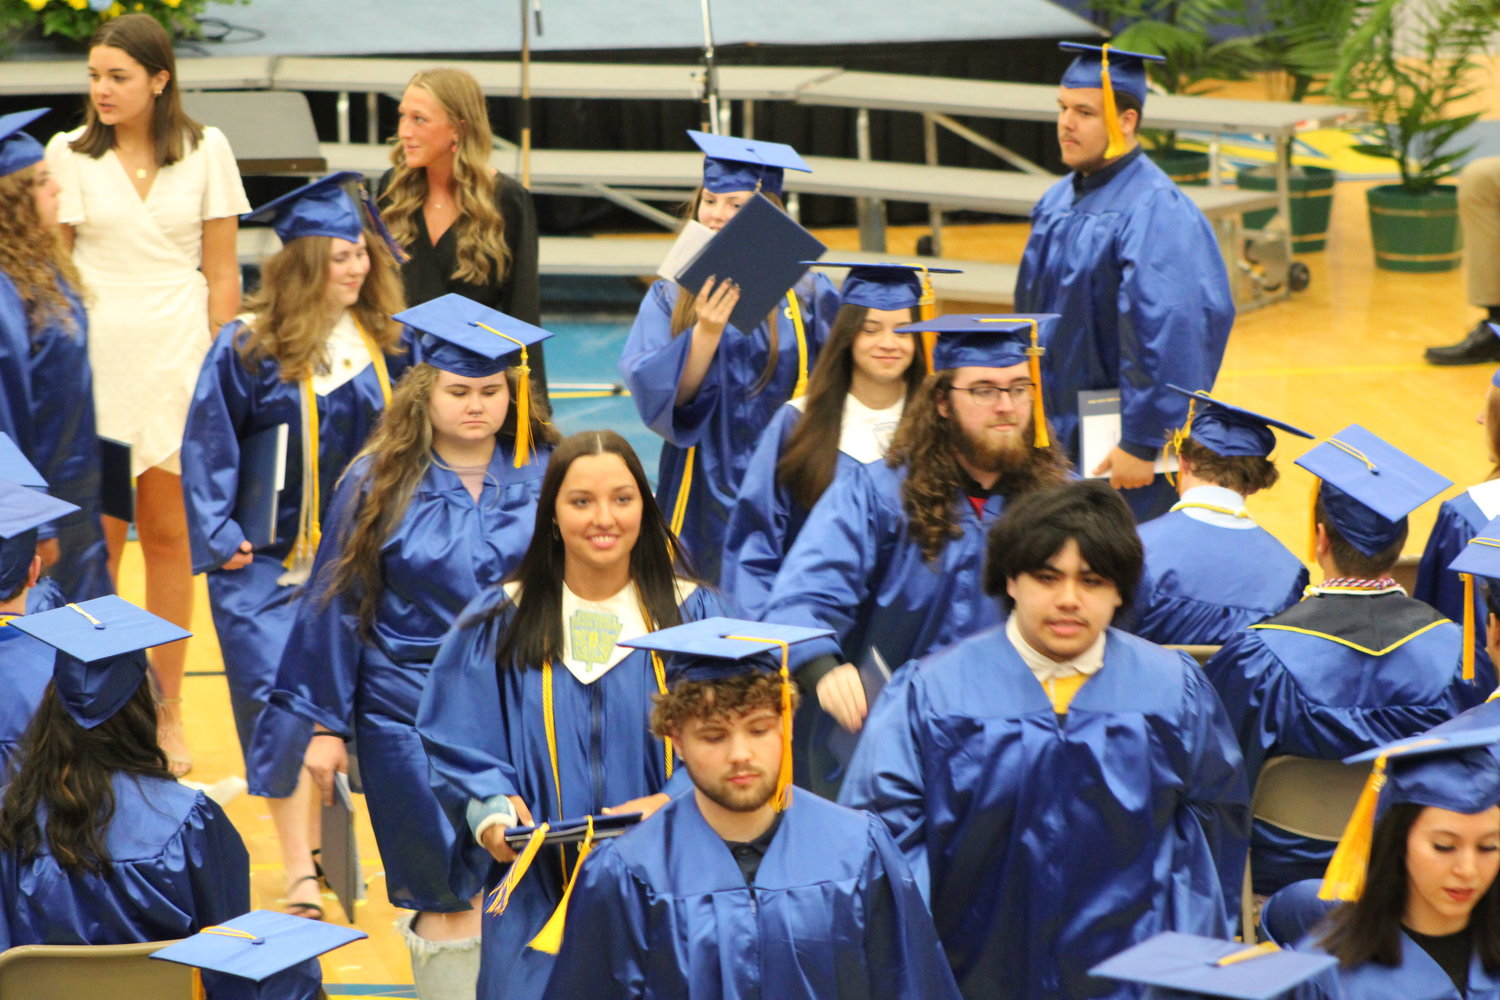 Members of the Class of 2022 exit the gym after officially being named graduates of Crawfordsville High School.